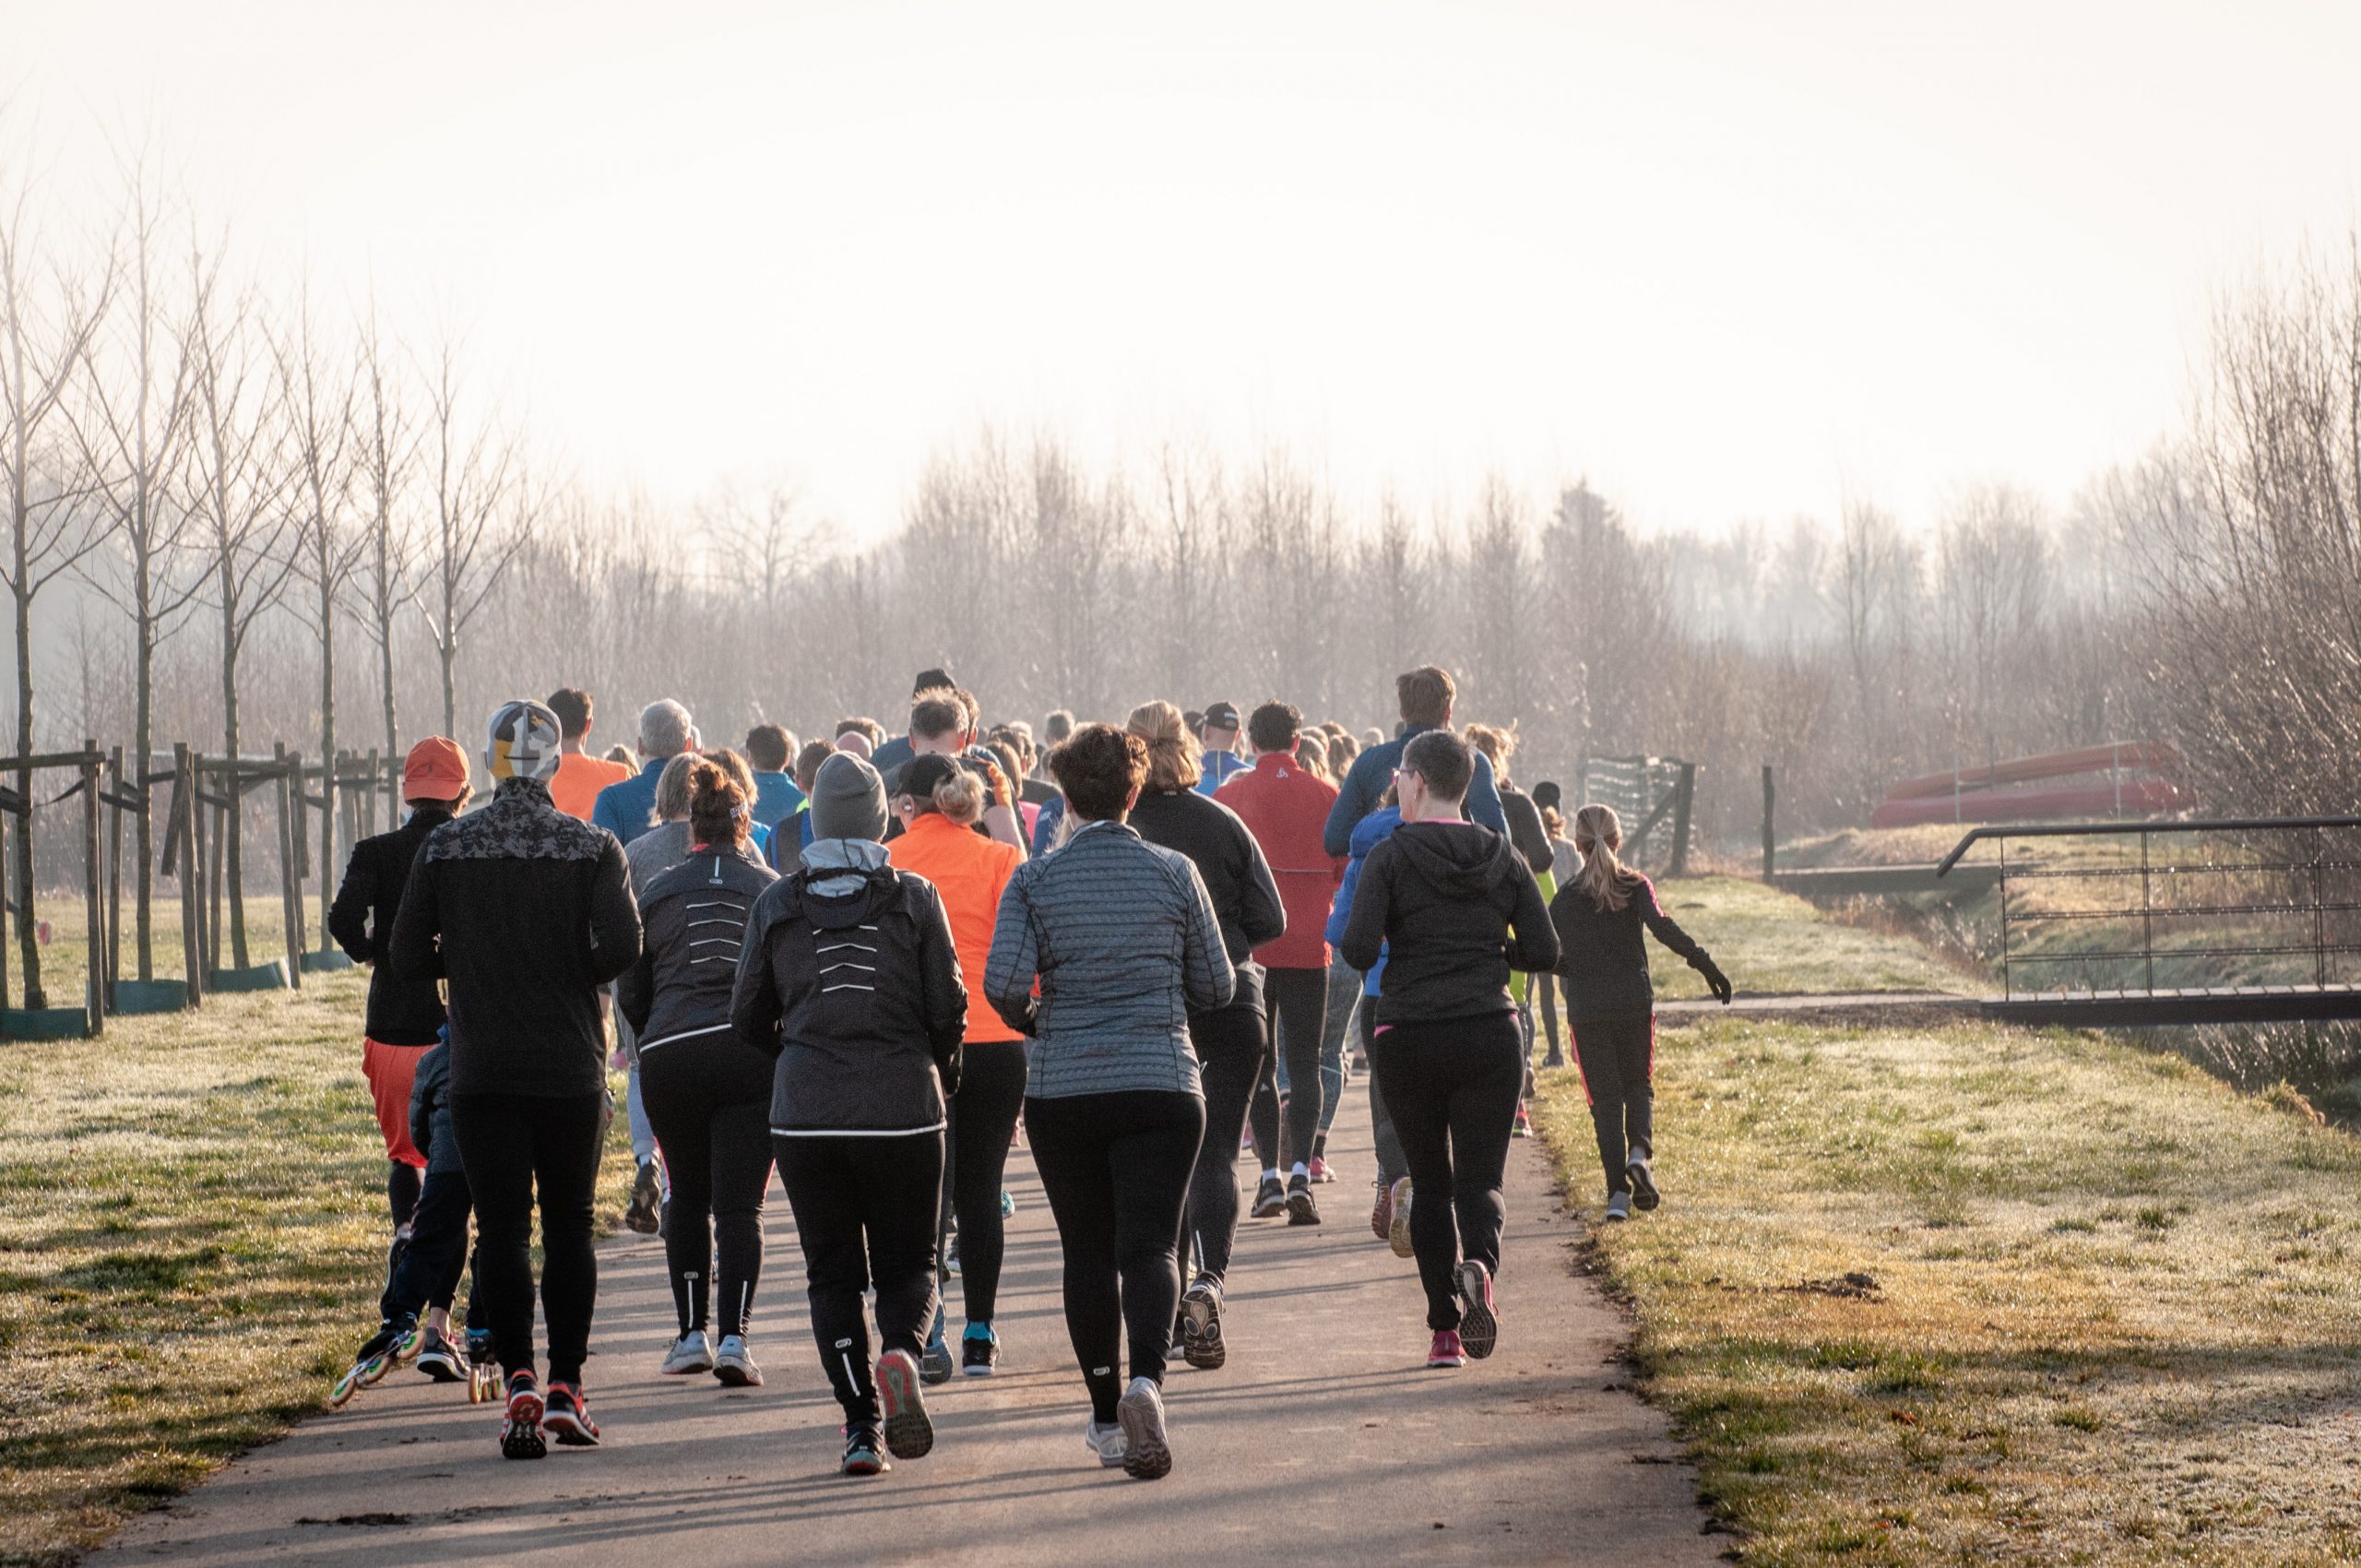 A photograph of a group of runners having a run in slight frost.